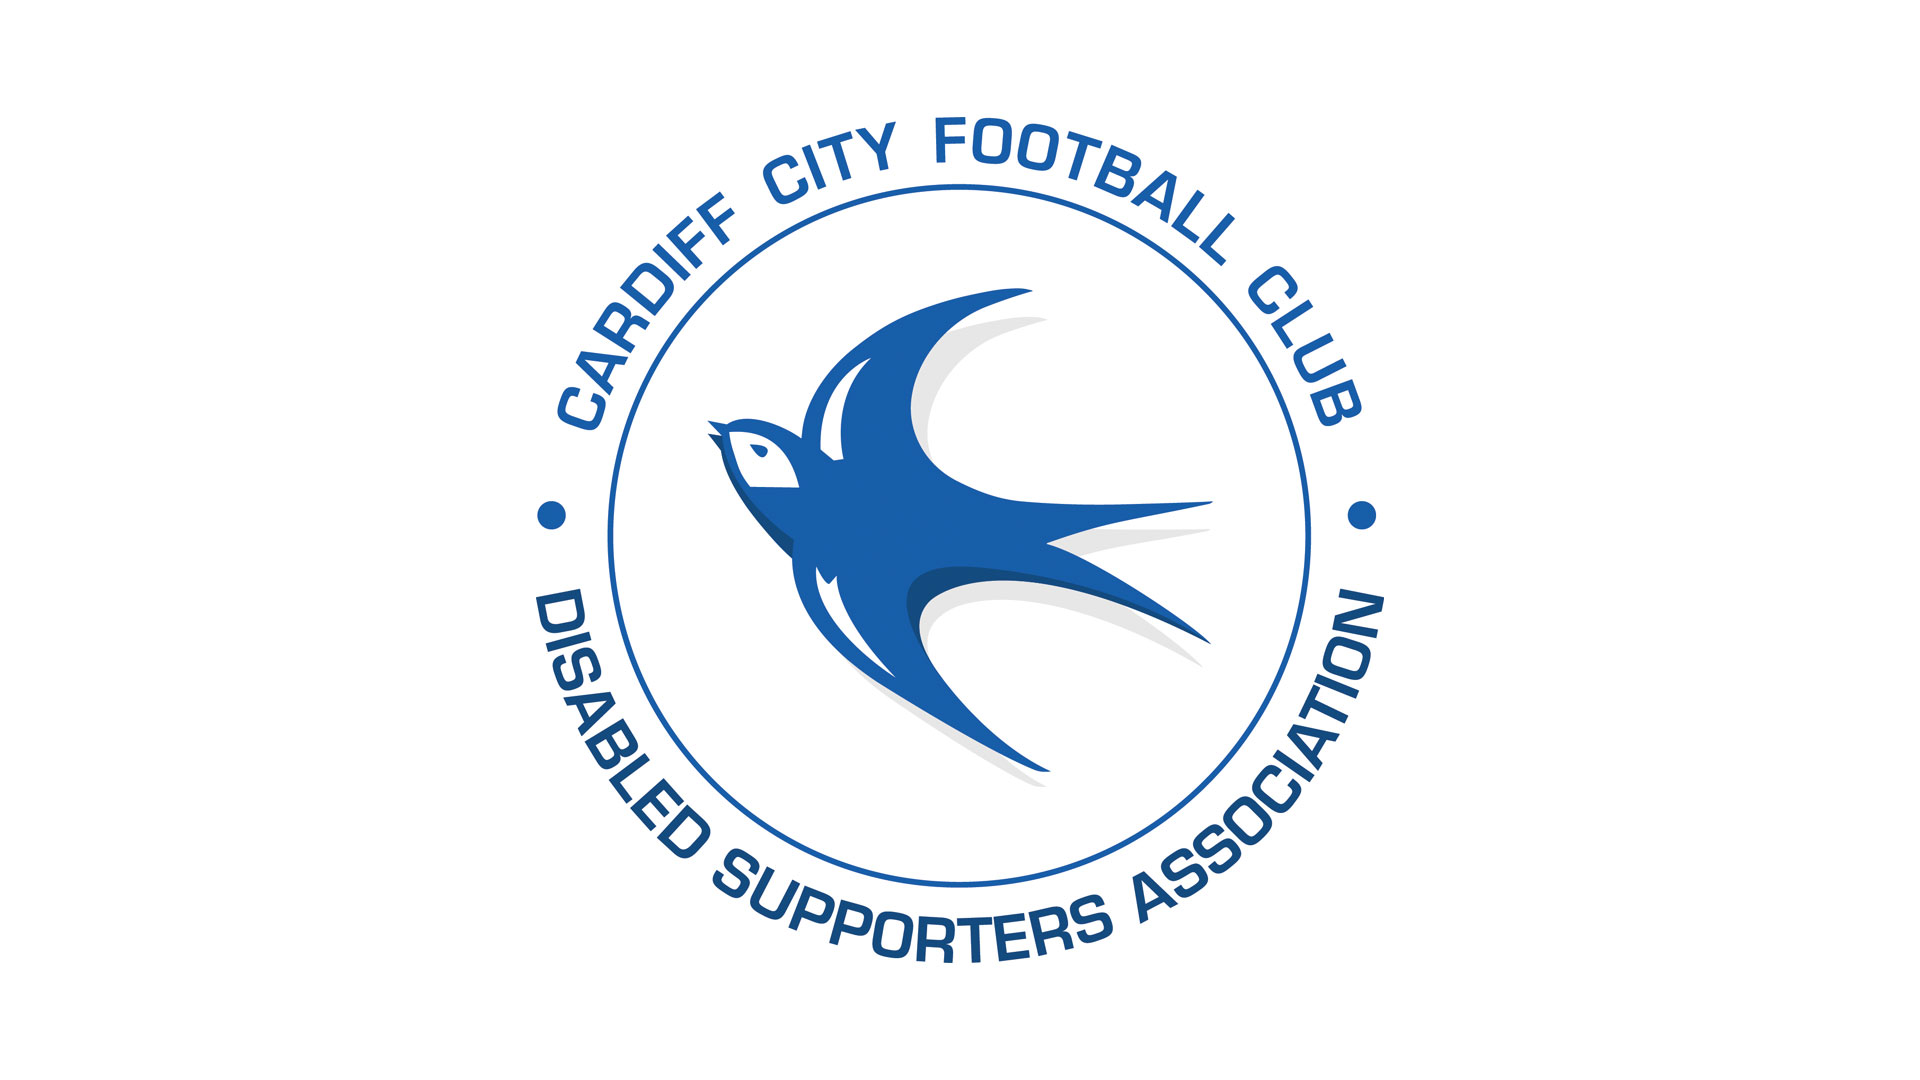 Cardiff City Football Club Disabled Supporters Association